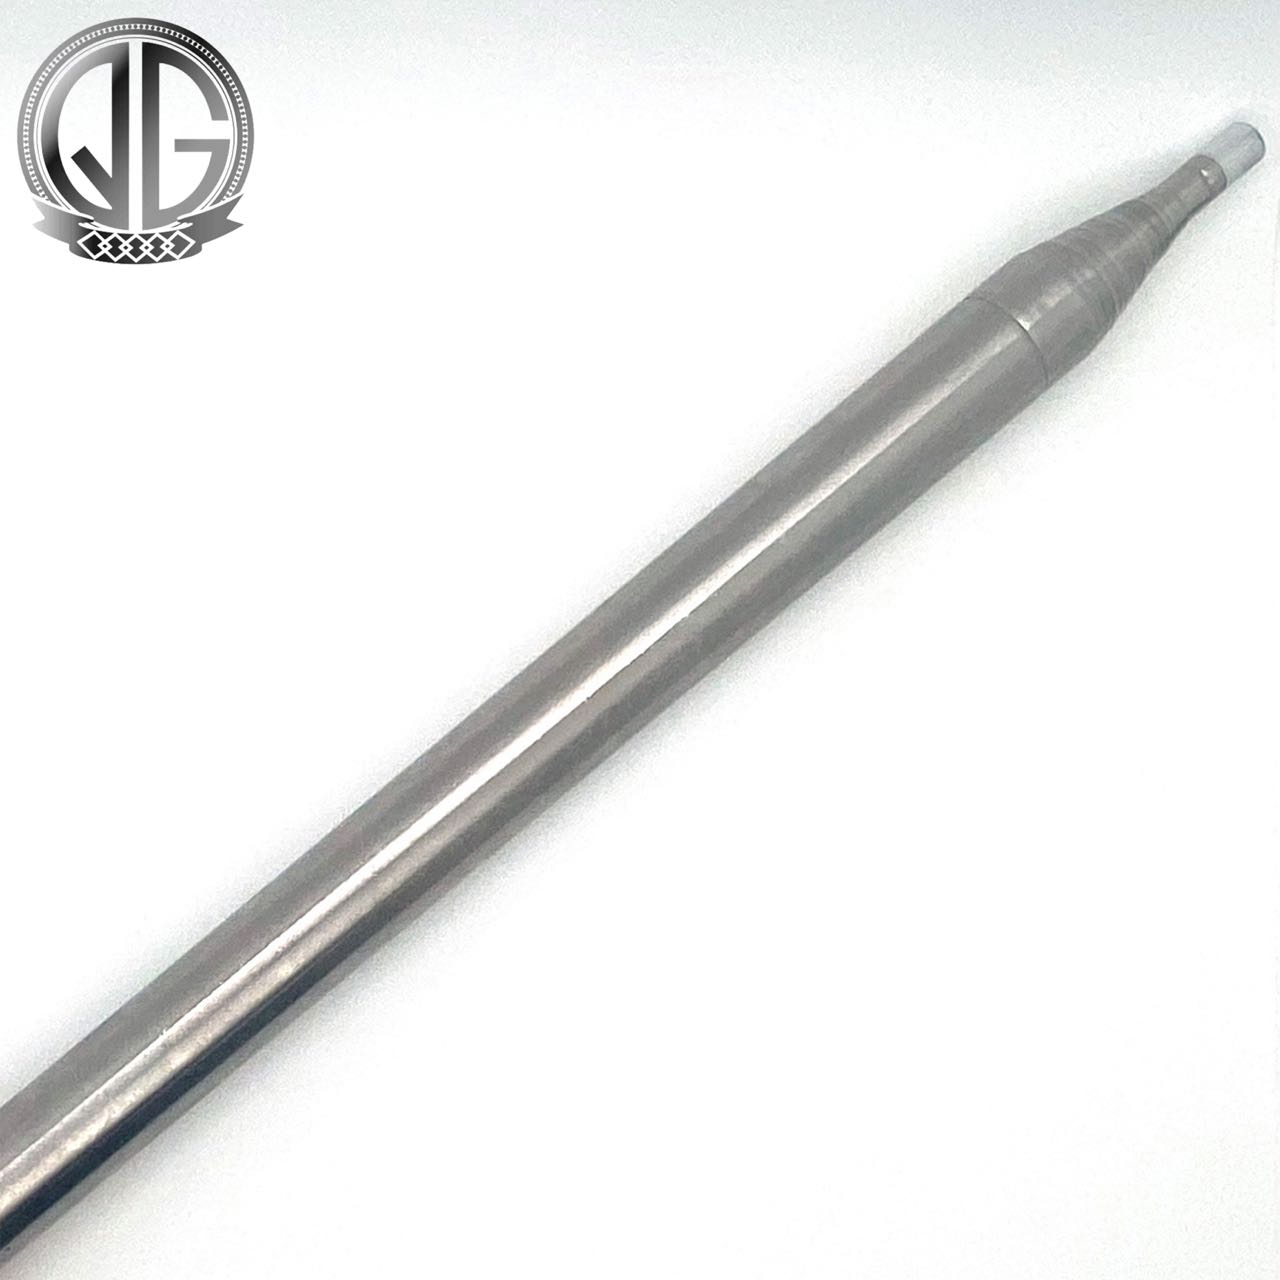 Stainless Steel Telescopic Pole for Golf Pick Up Tool Featured Image